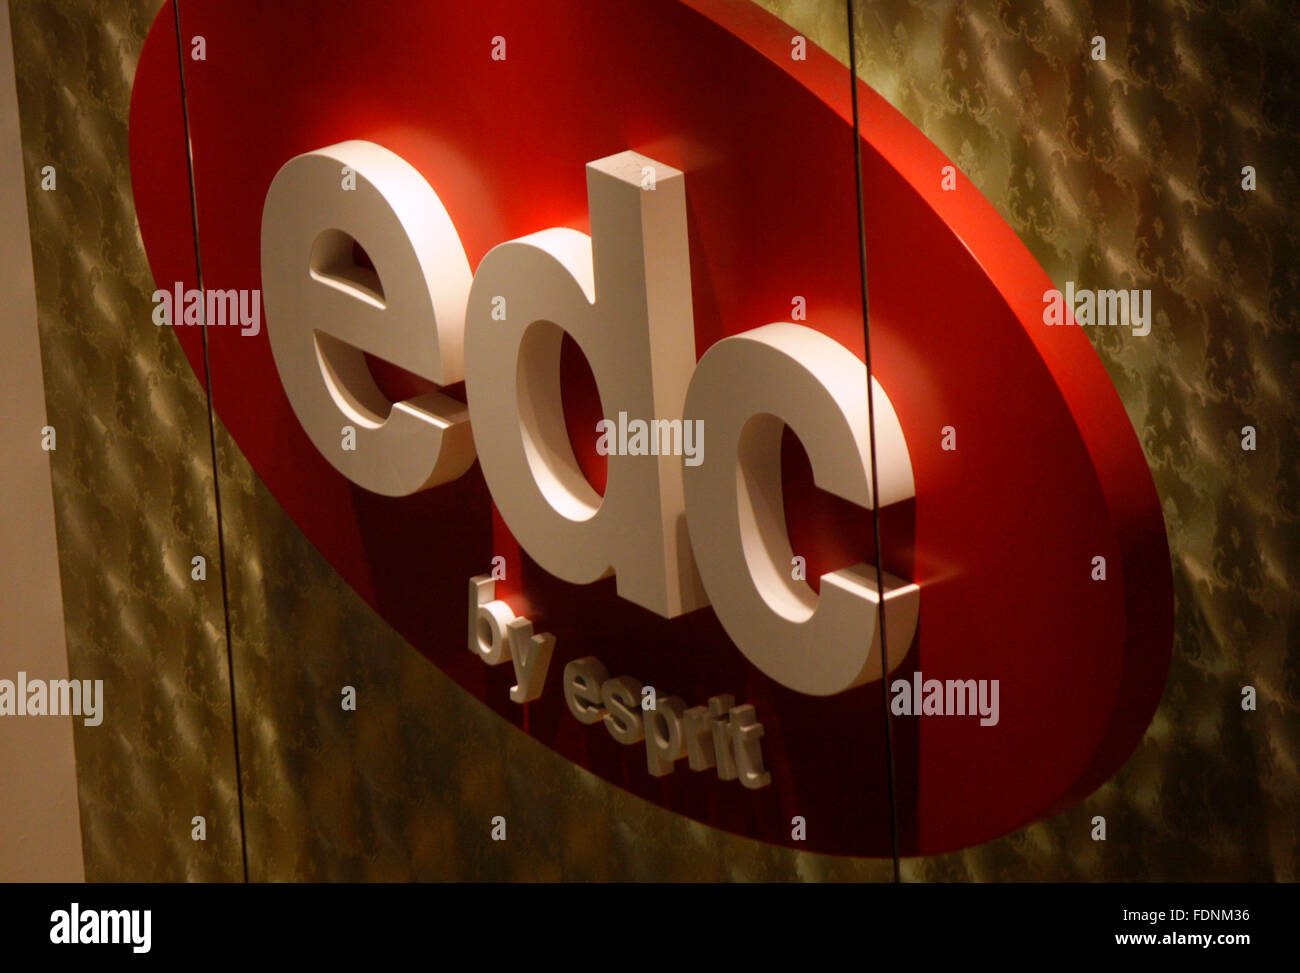 Edc by esprit hi-res stock photography and images - Alamy